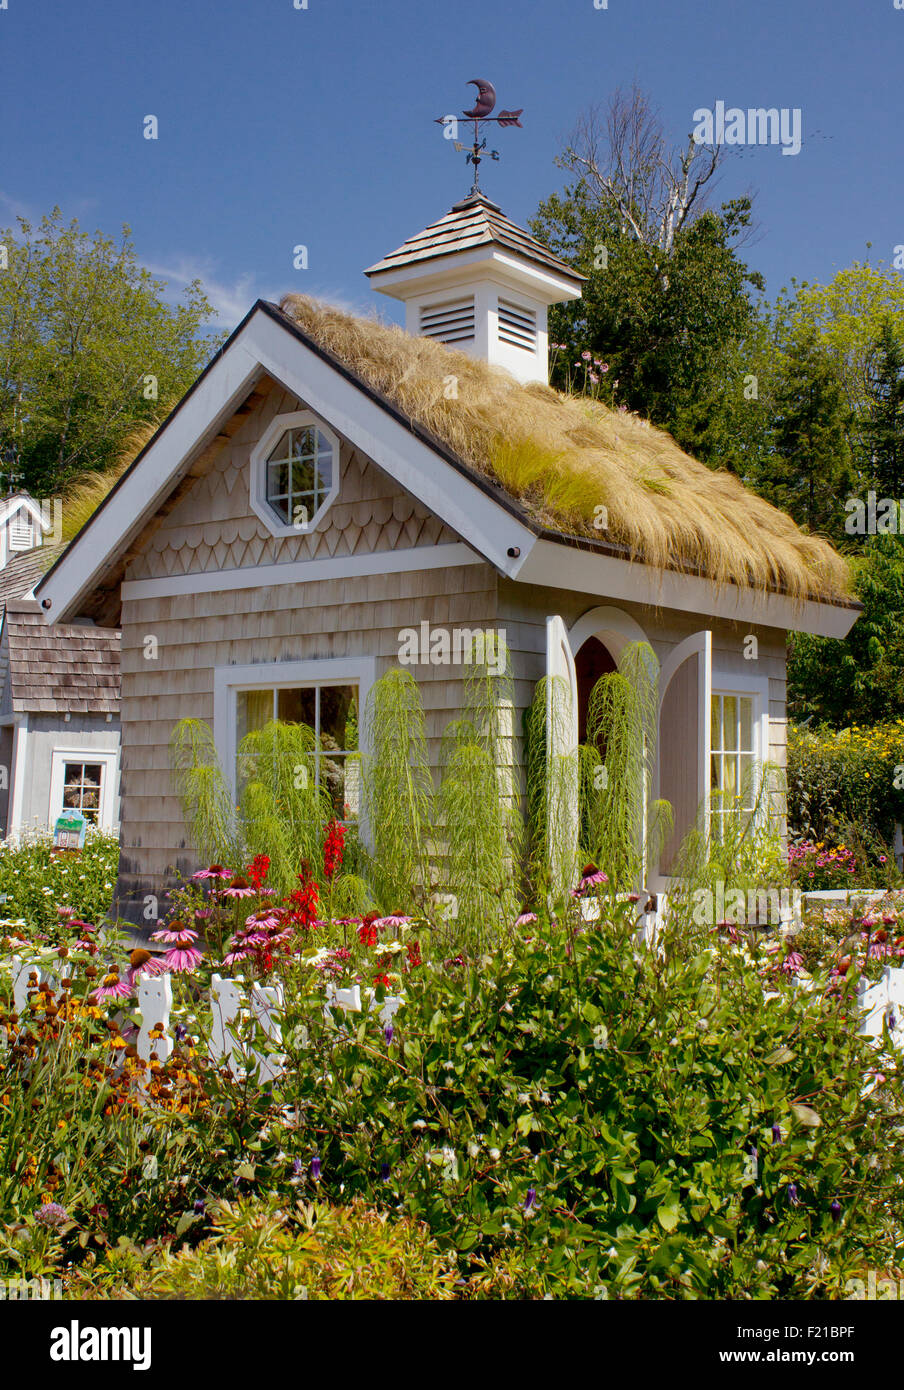 Garden shed with grass roof at the Coastal Maine Botanical Gardens, Boothbay, Maine. Stock Photo